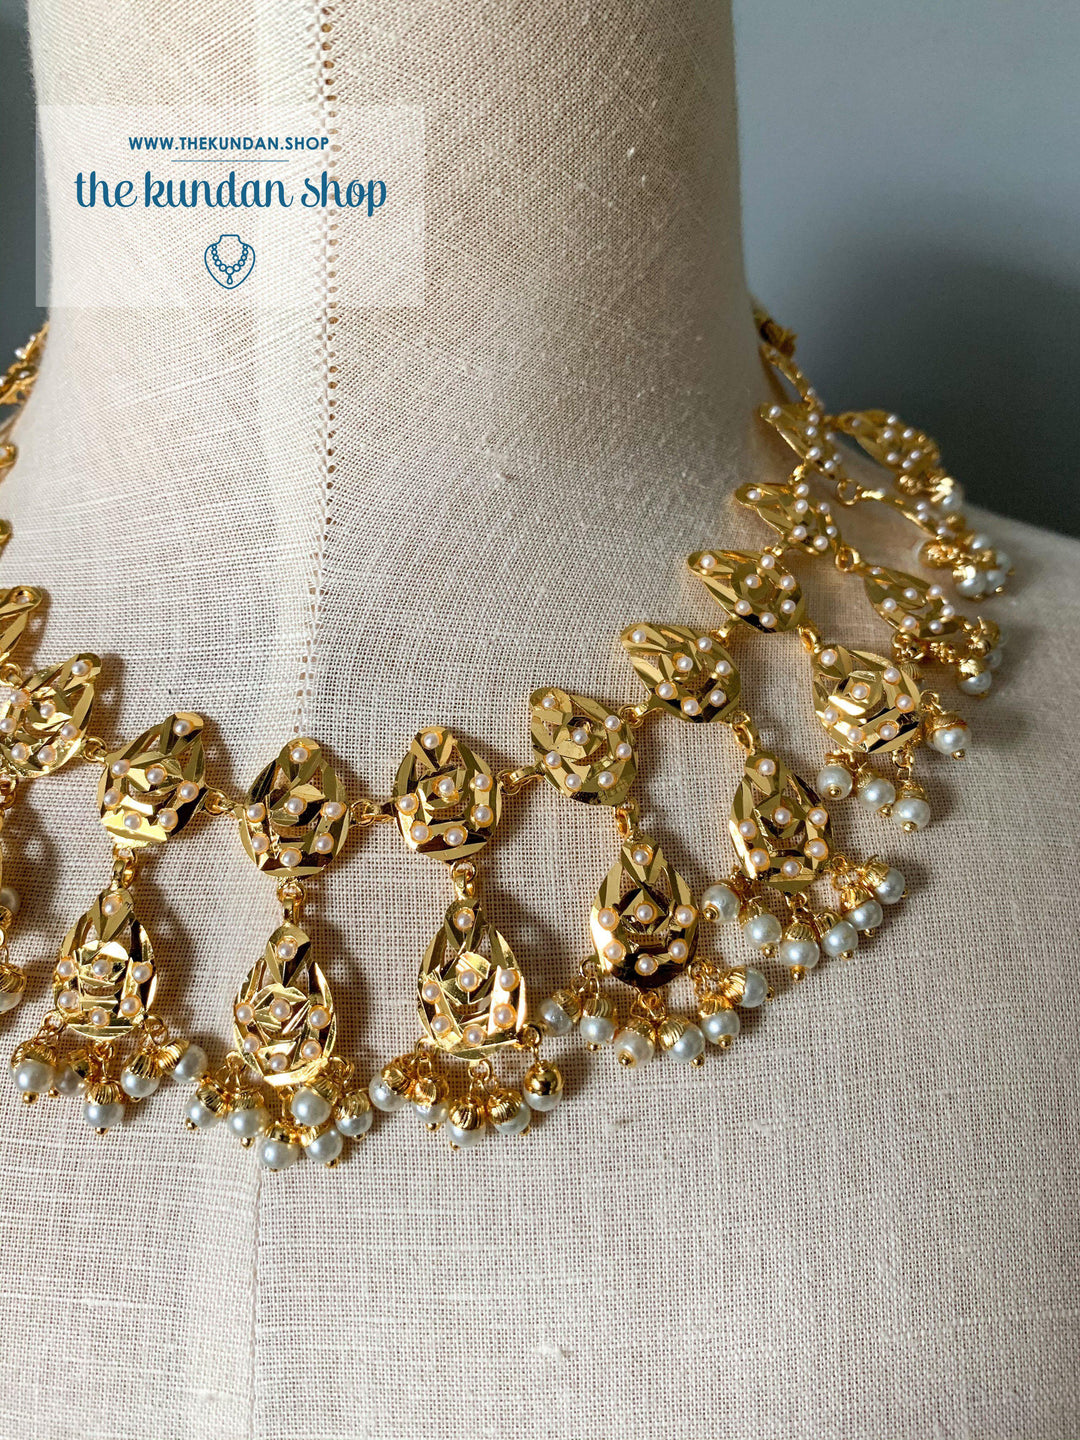 Smitten in Pearl, Necklace Sets - THE KUNDAN SHOP